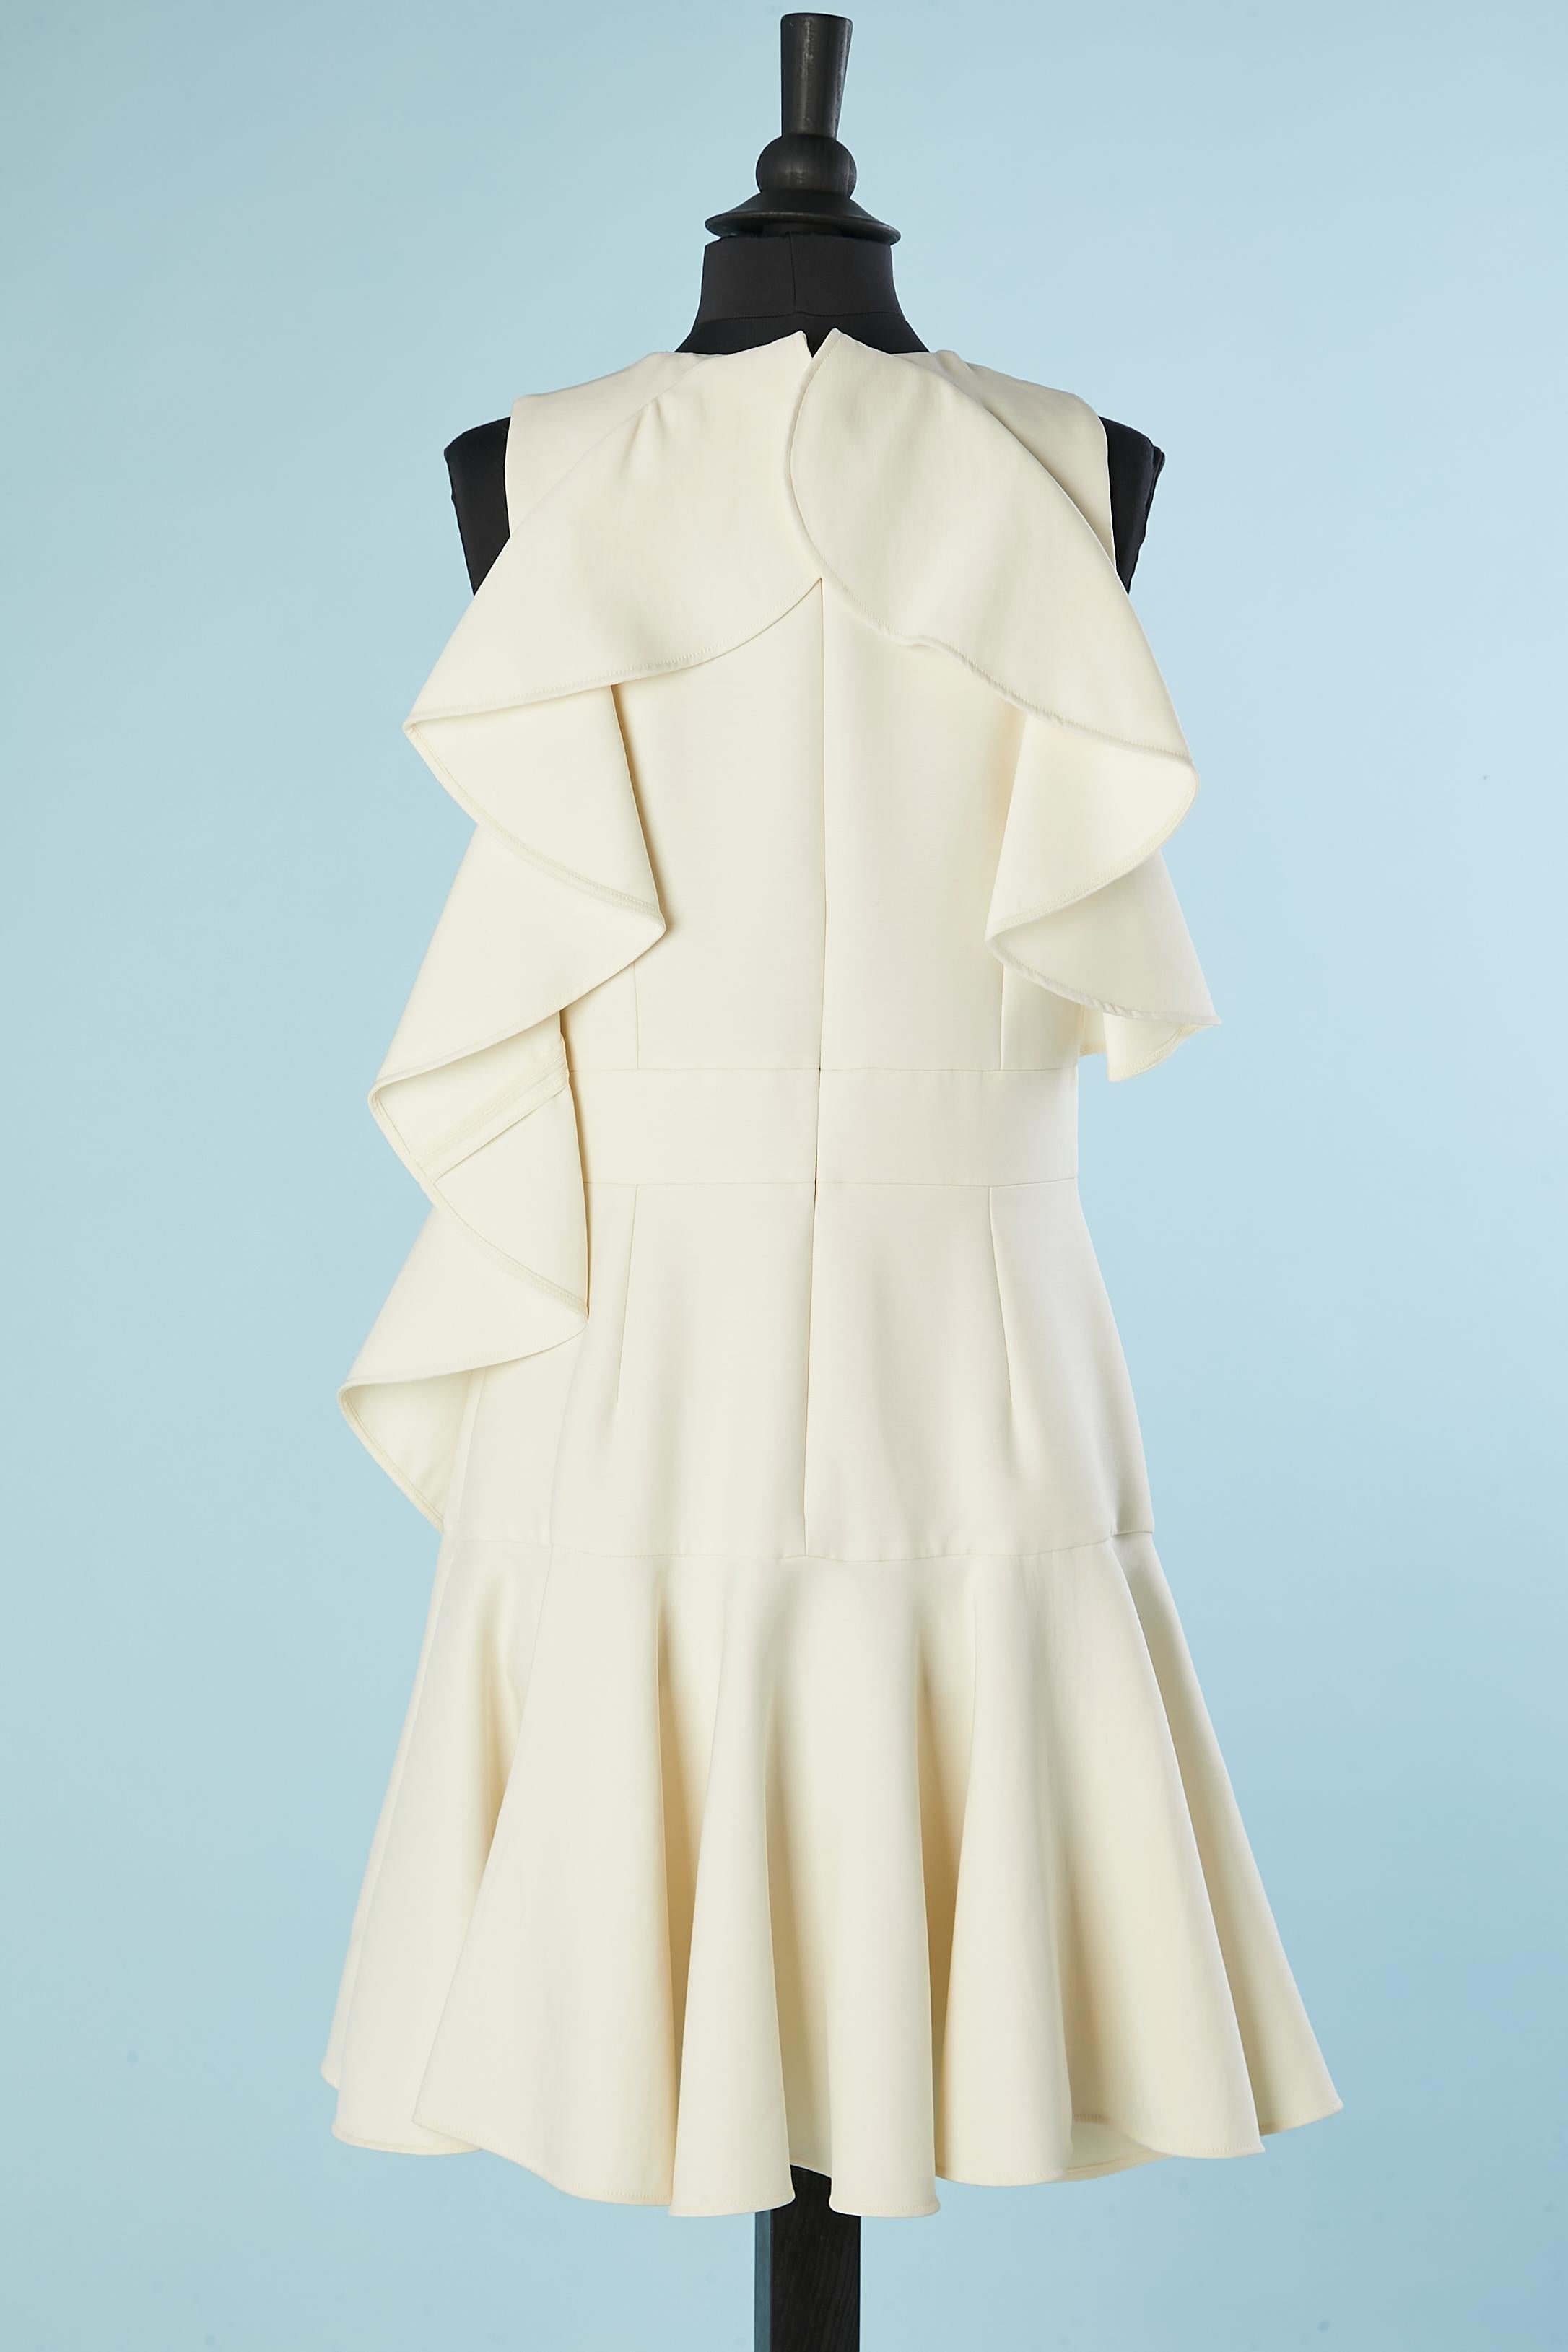 Off-white asymmetrical cocktail dress with ruffles Alexander McQueen  In Excellent Condition For Sale In Saint-Ouen-Sur-Seine, FR